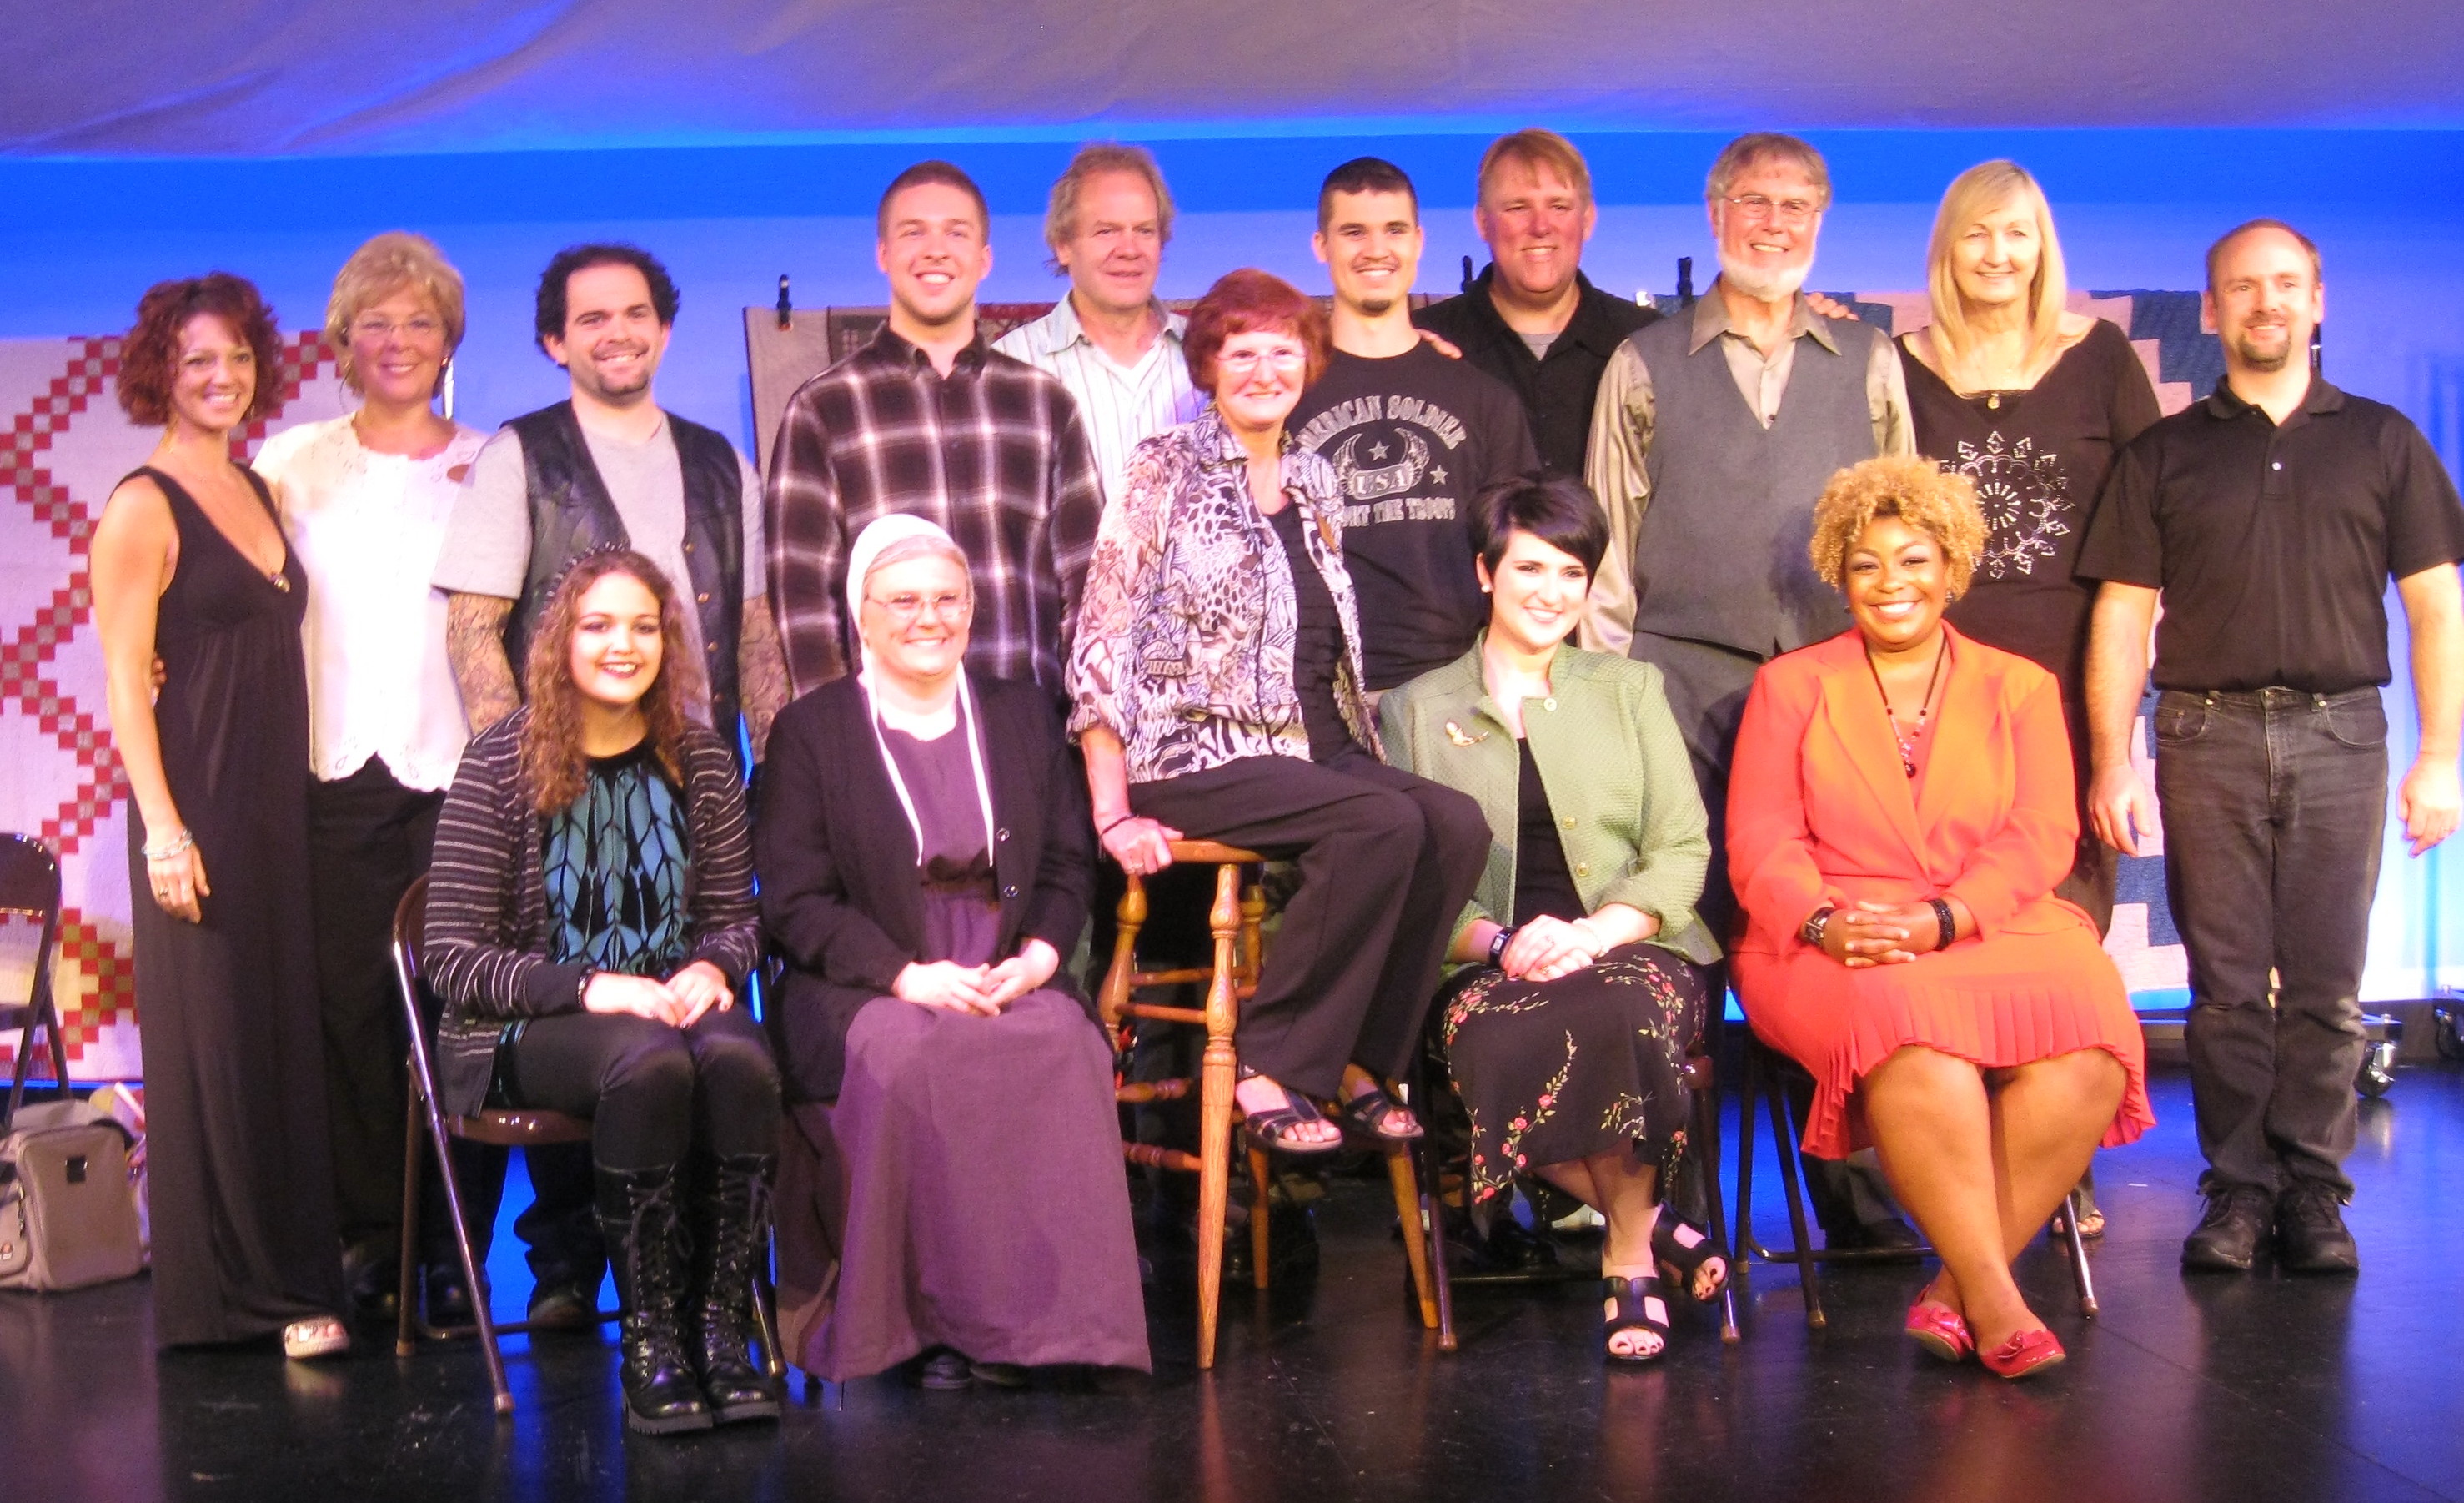 Cast and Team of Half-Stitched, the Musical, at premiere, 2012